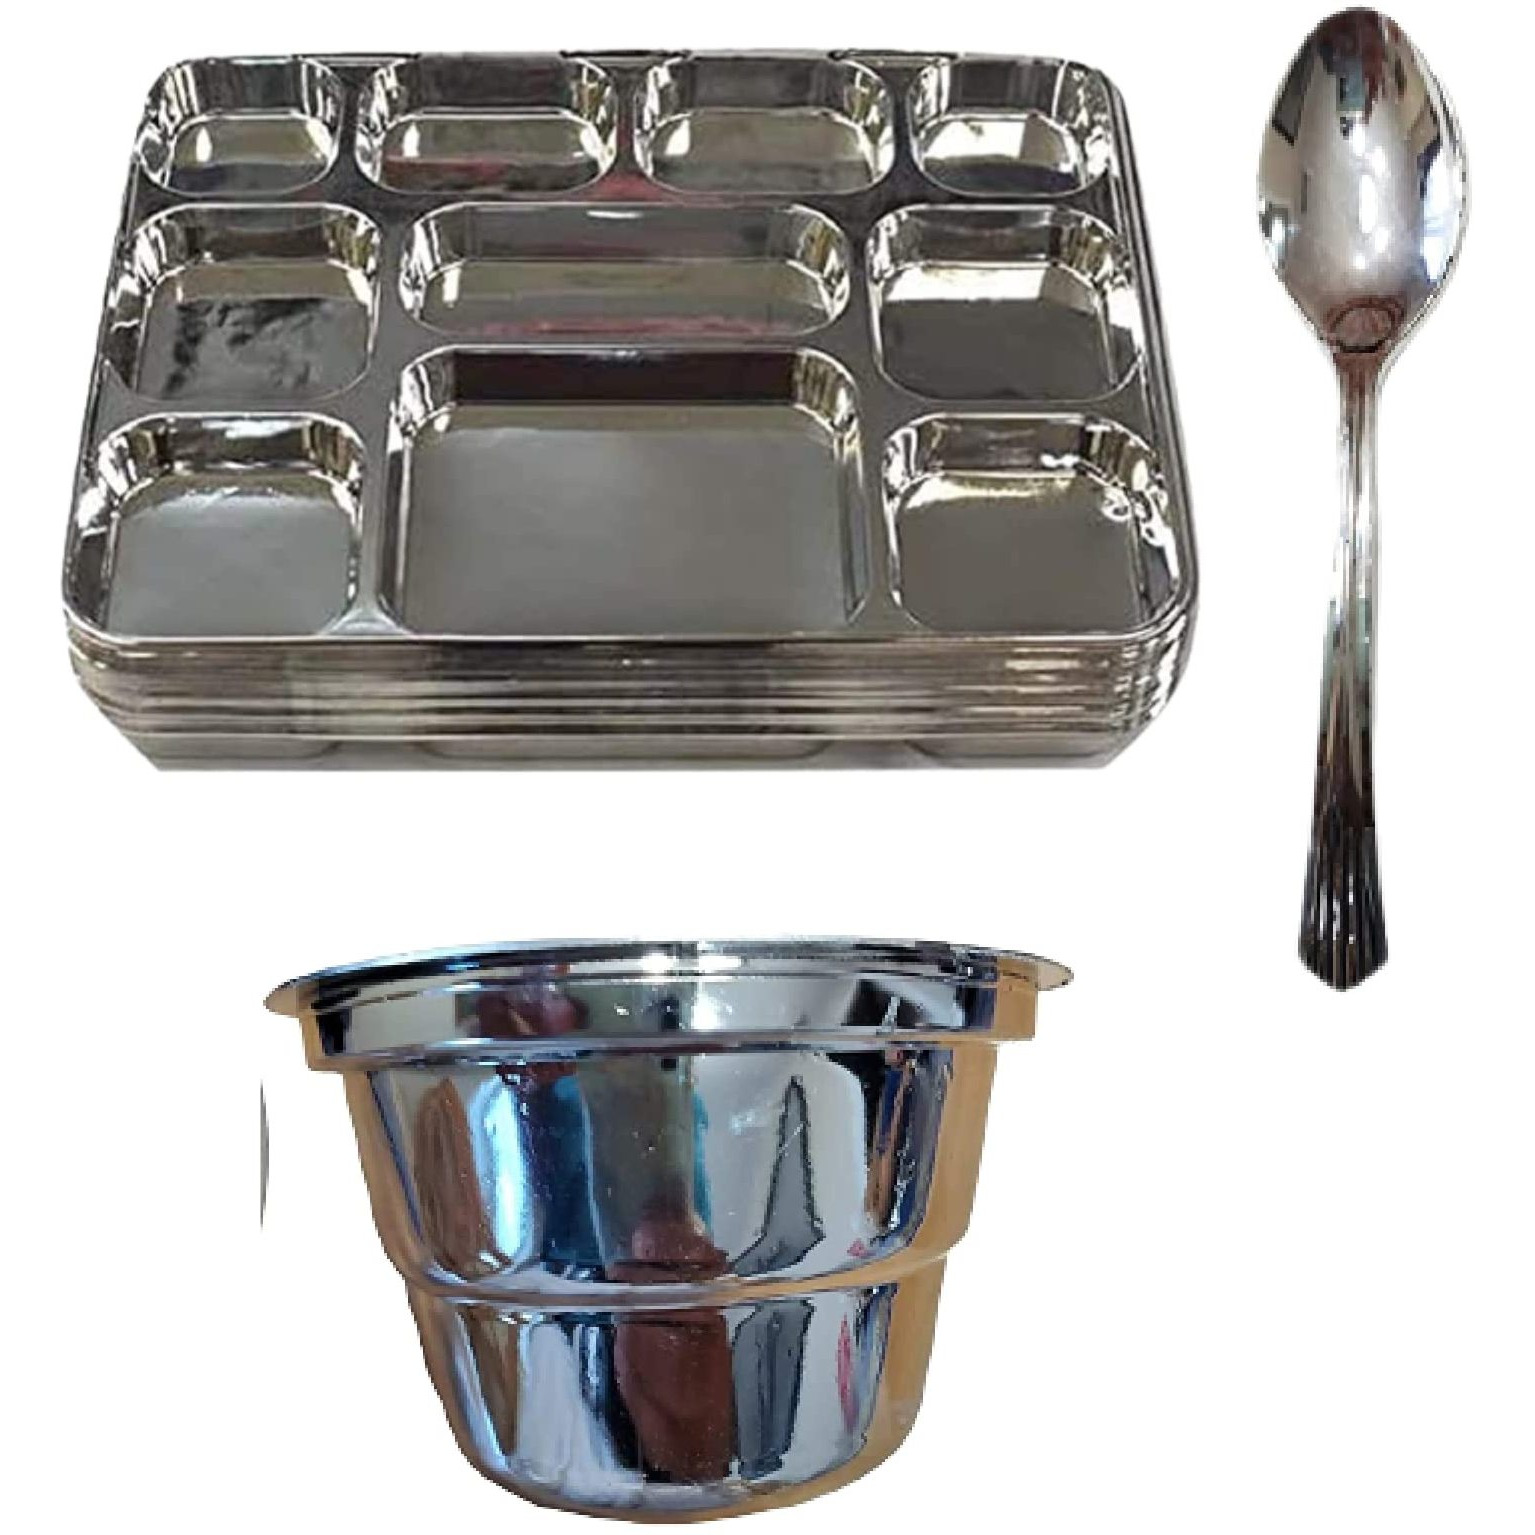 Disposable Plates 10 Compartment Silver Thali Plates Trays - For Indian Puja, Partys, Weddings